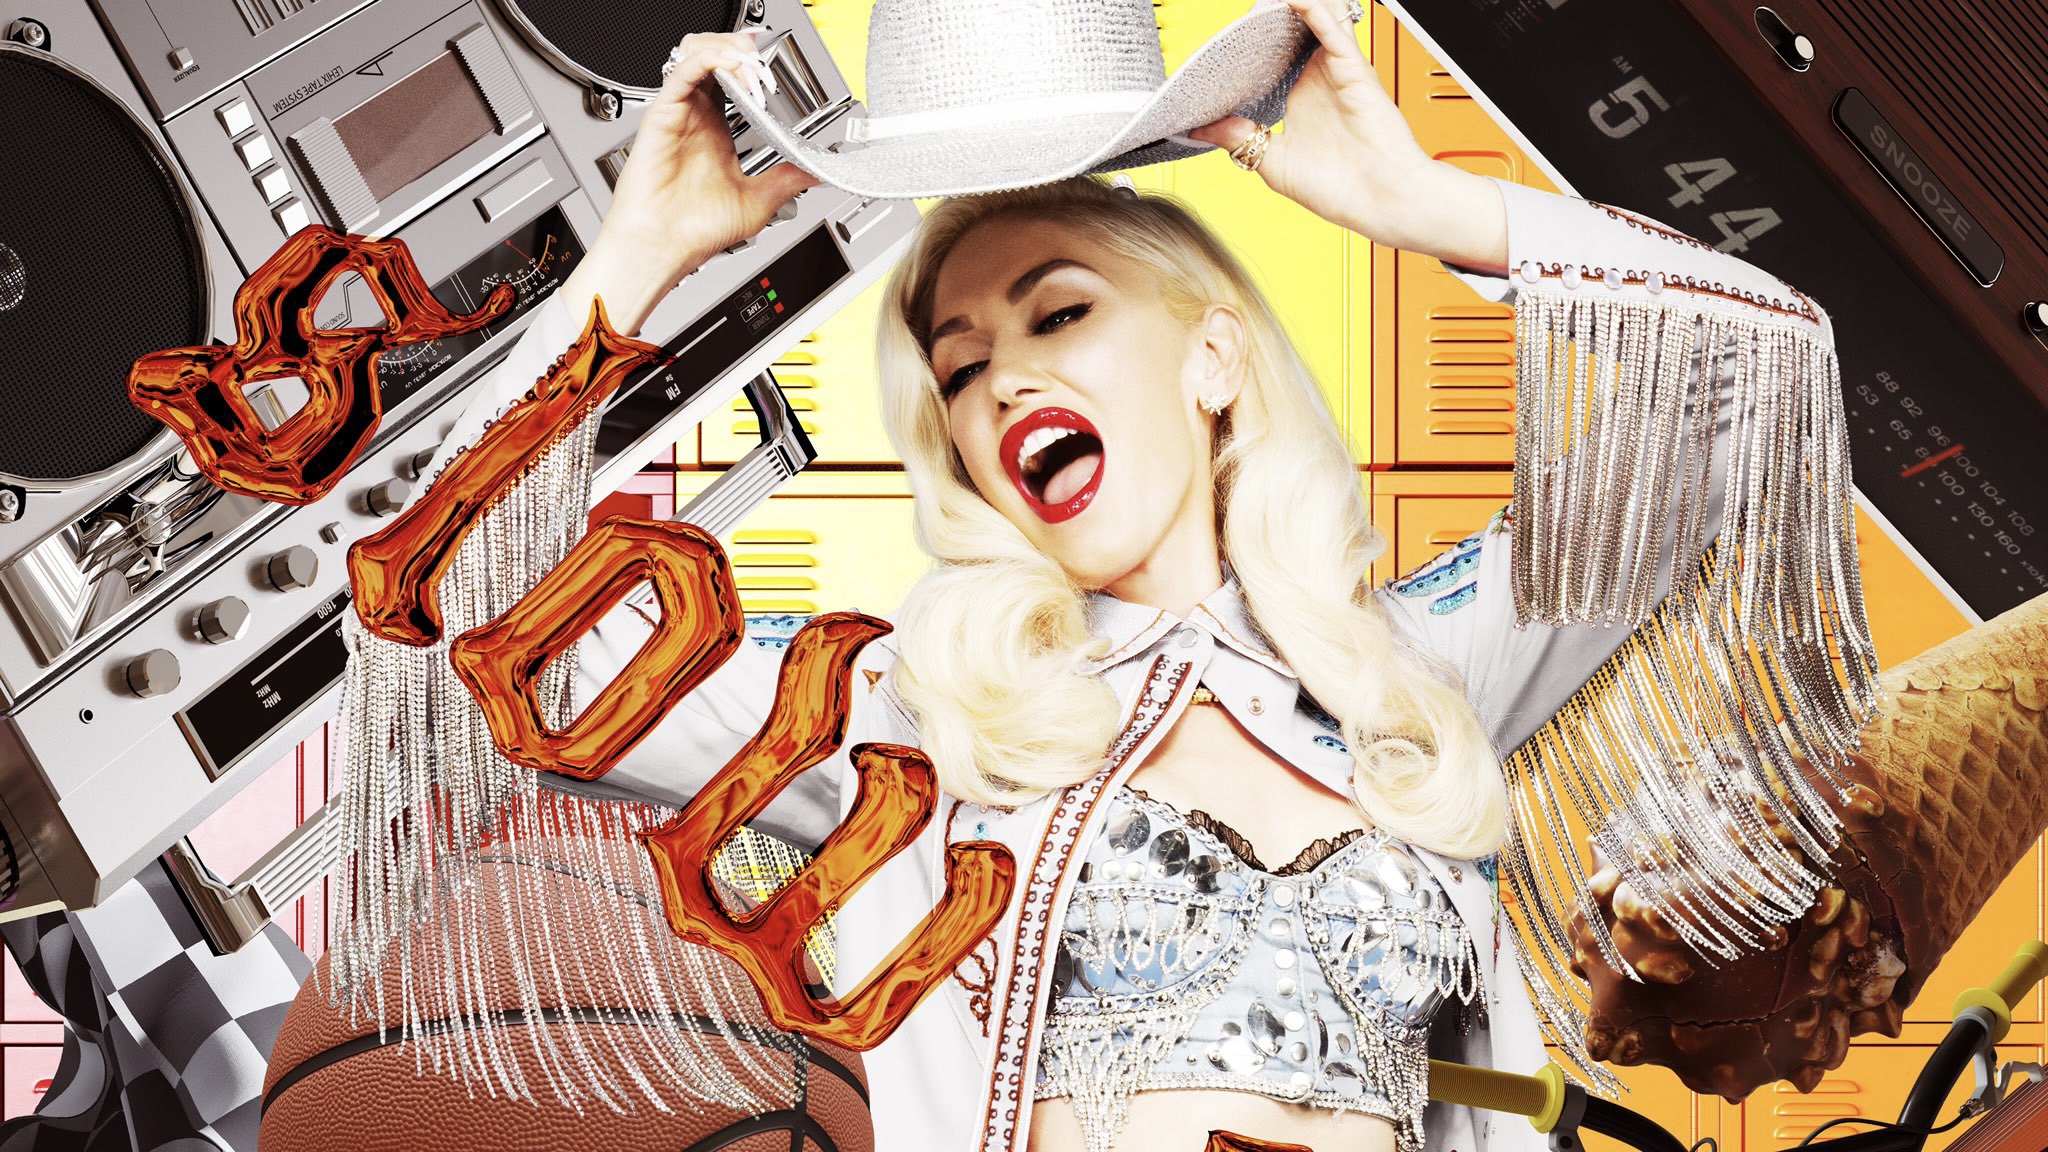 Gwen Stefani 'New album is about defining phase of my life' RETROPOP